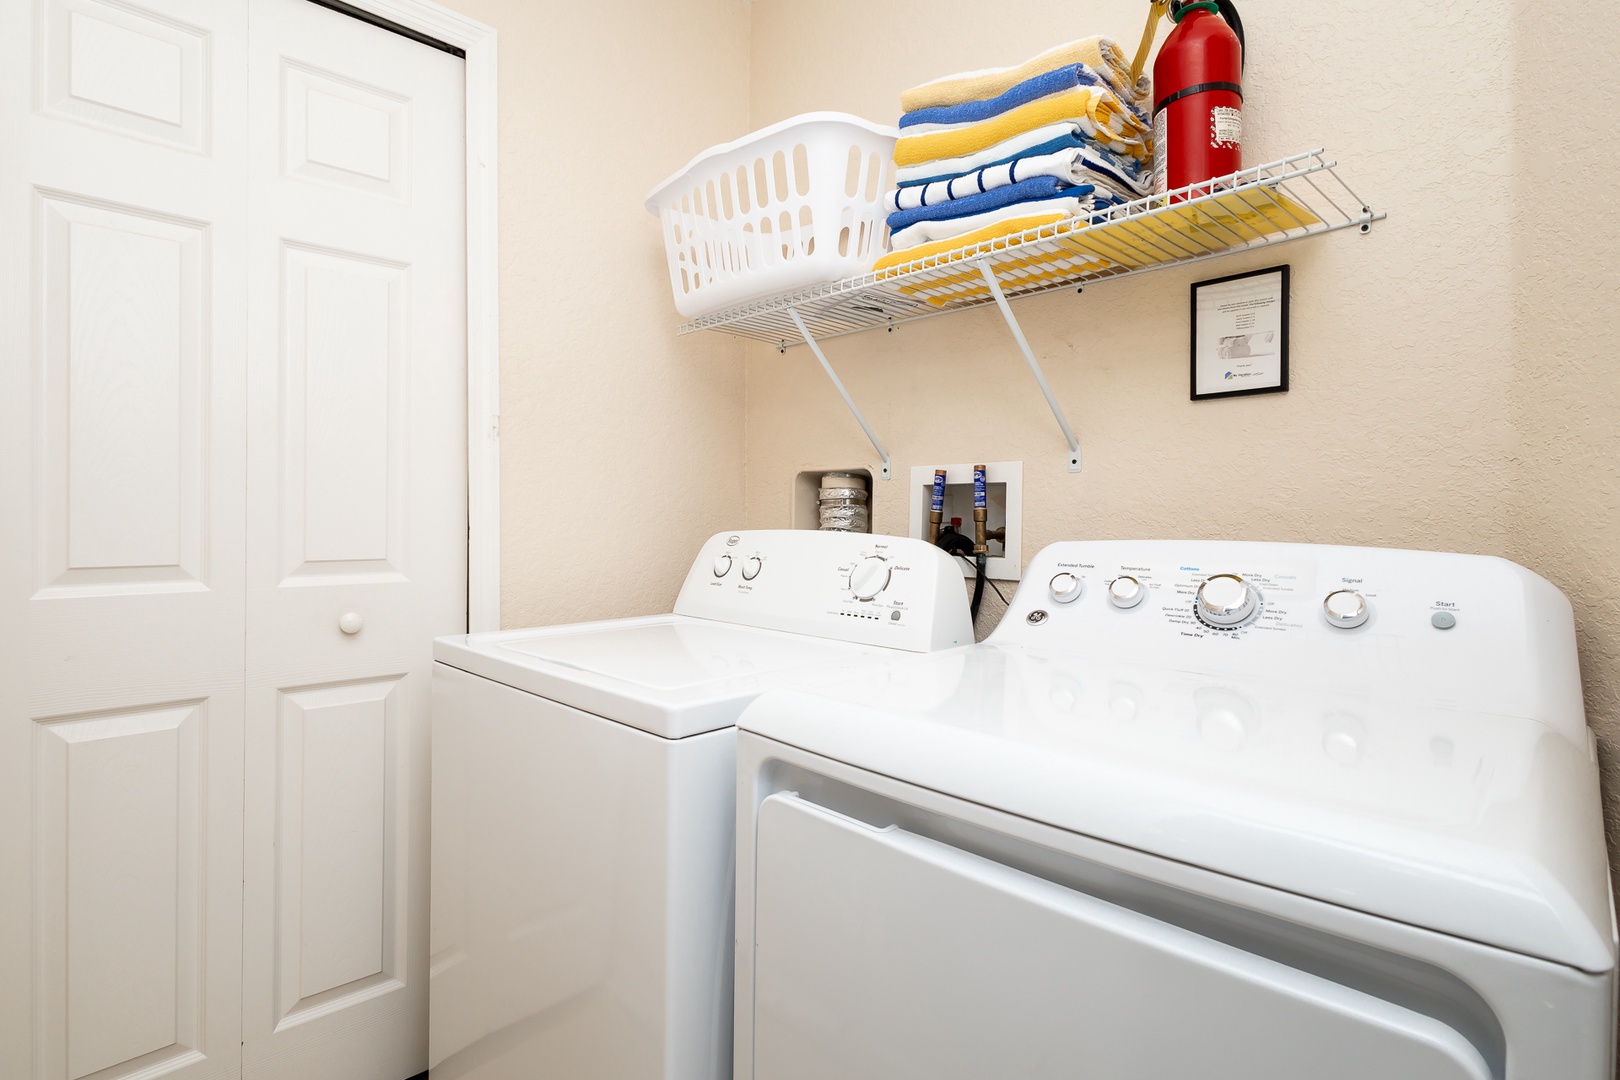 Private laundry is available for your stay, located on the second floor